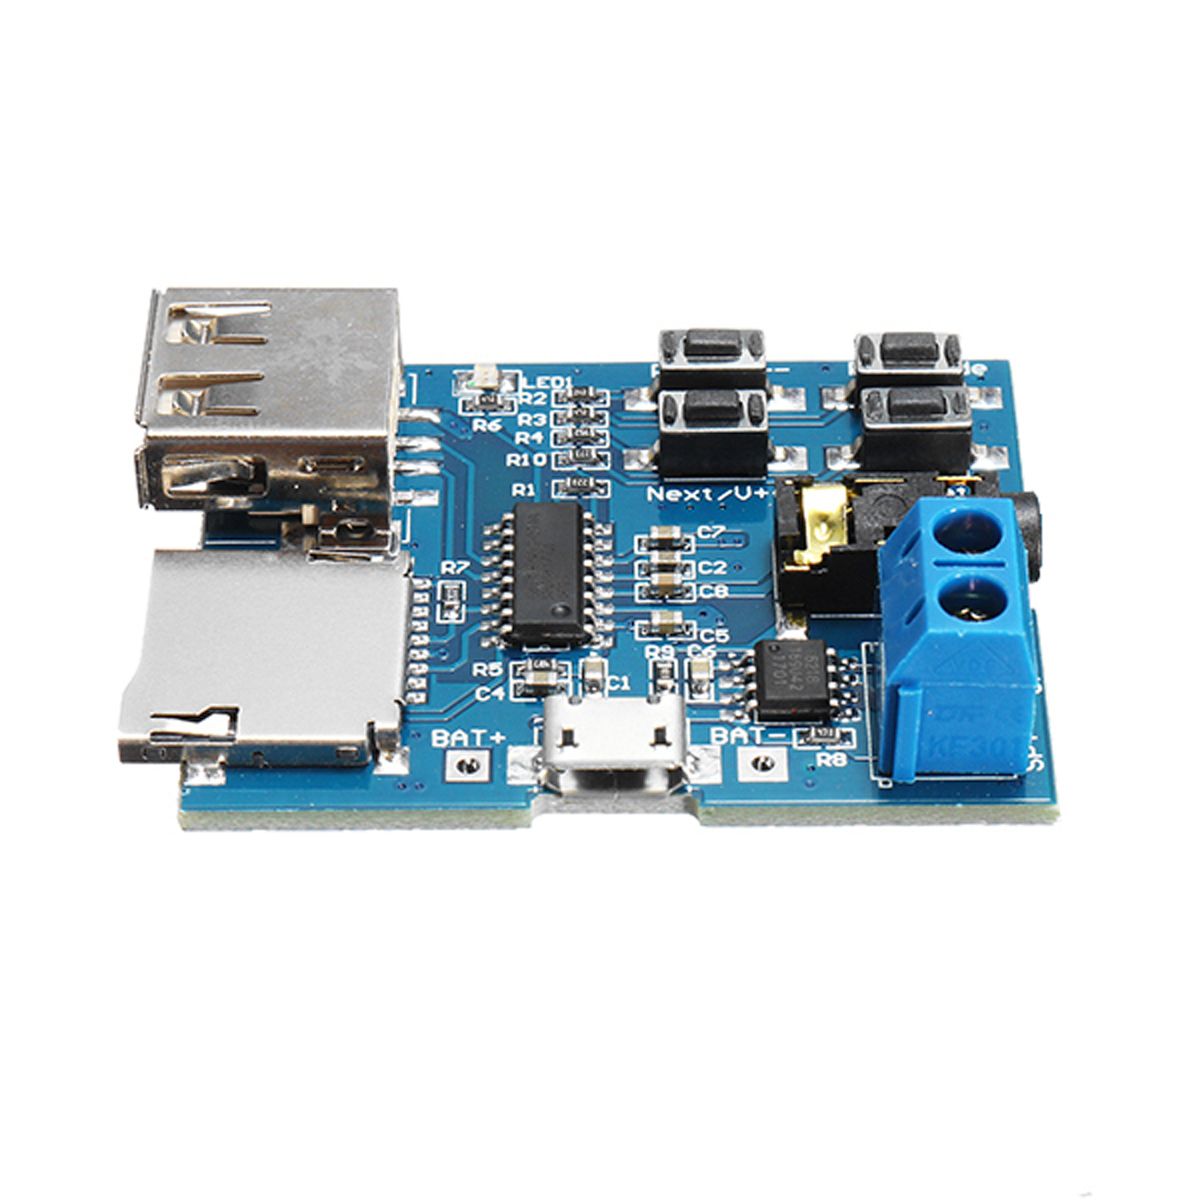 20pcs-MP3-Lossless-Decoder-Board-With-Power-Amplifier-Module-TF-Card-Decoding-Player-1366969